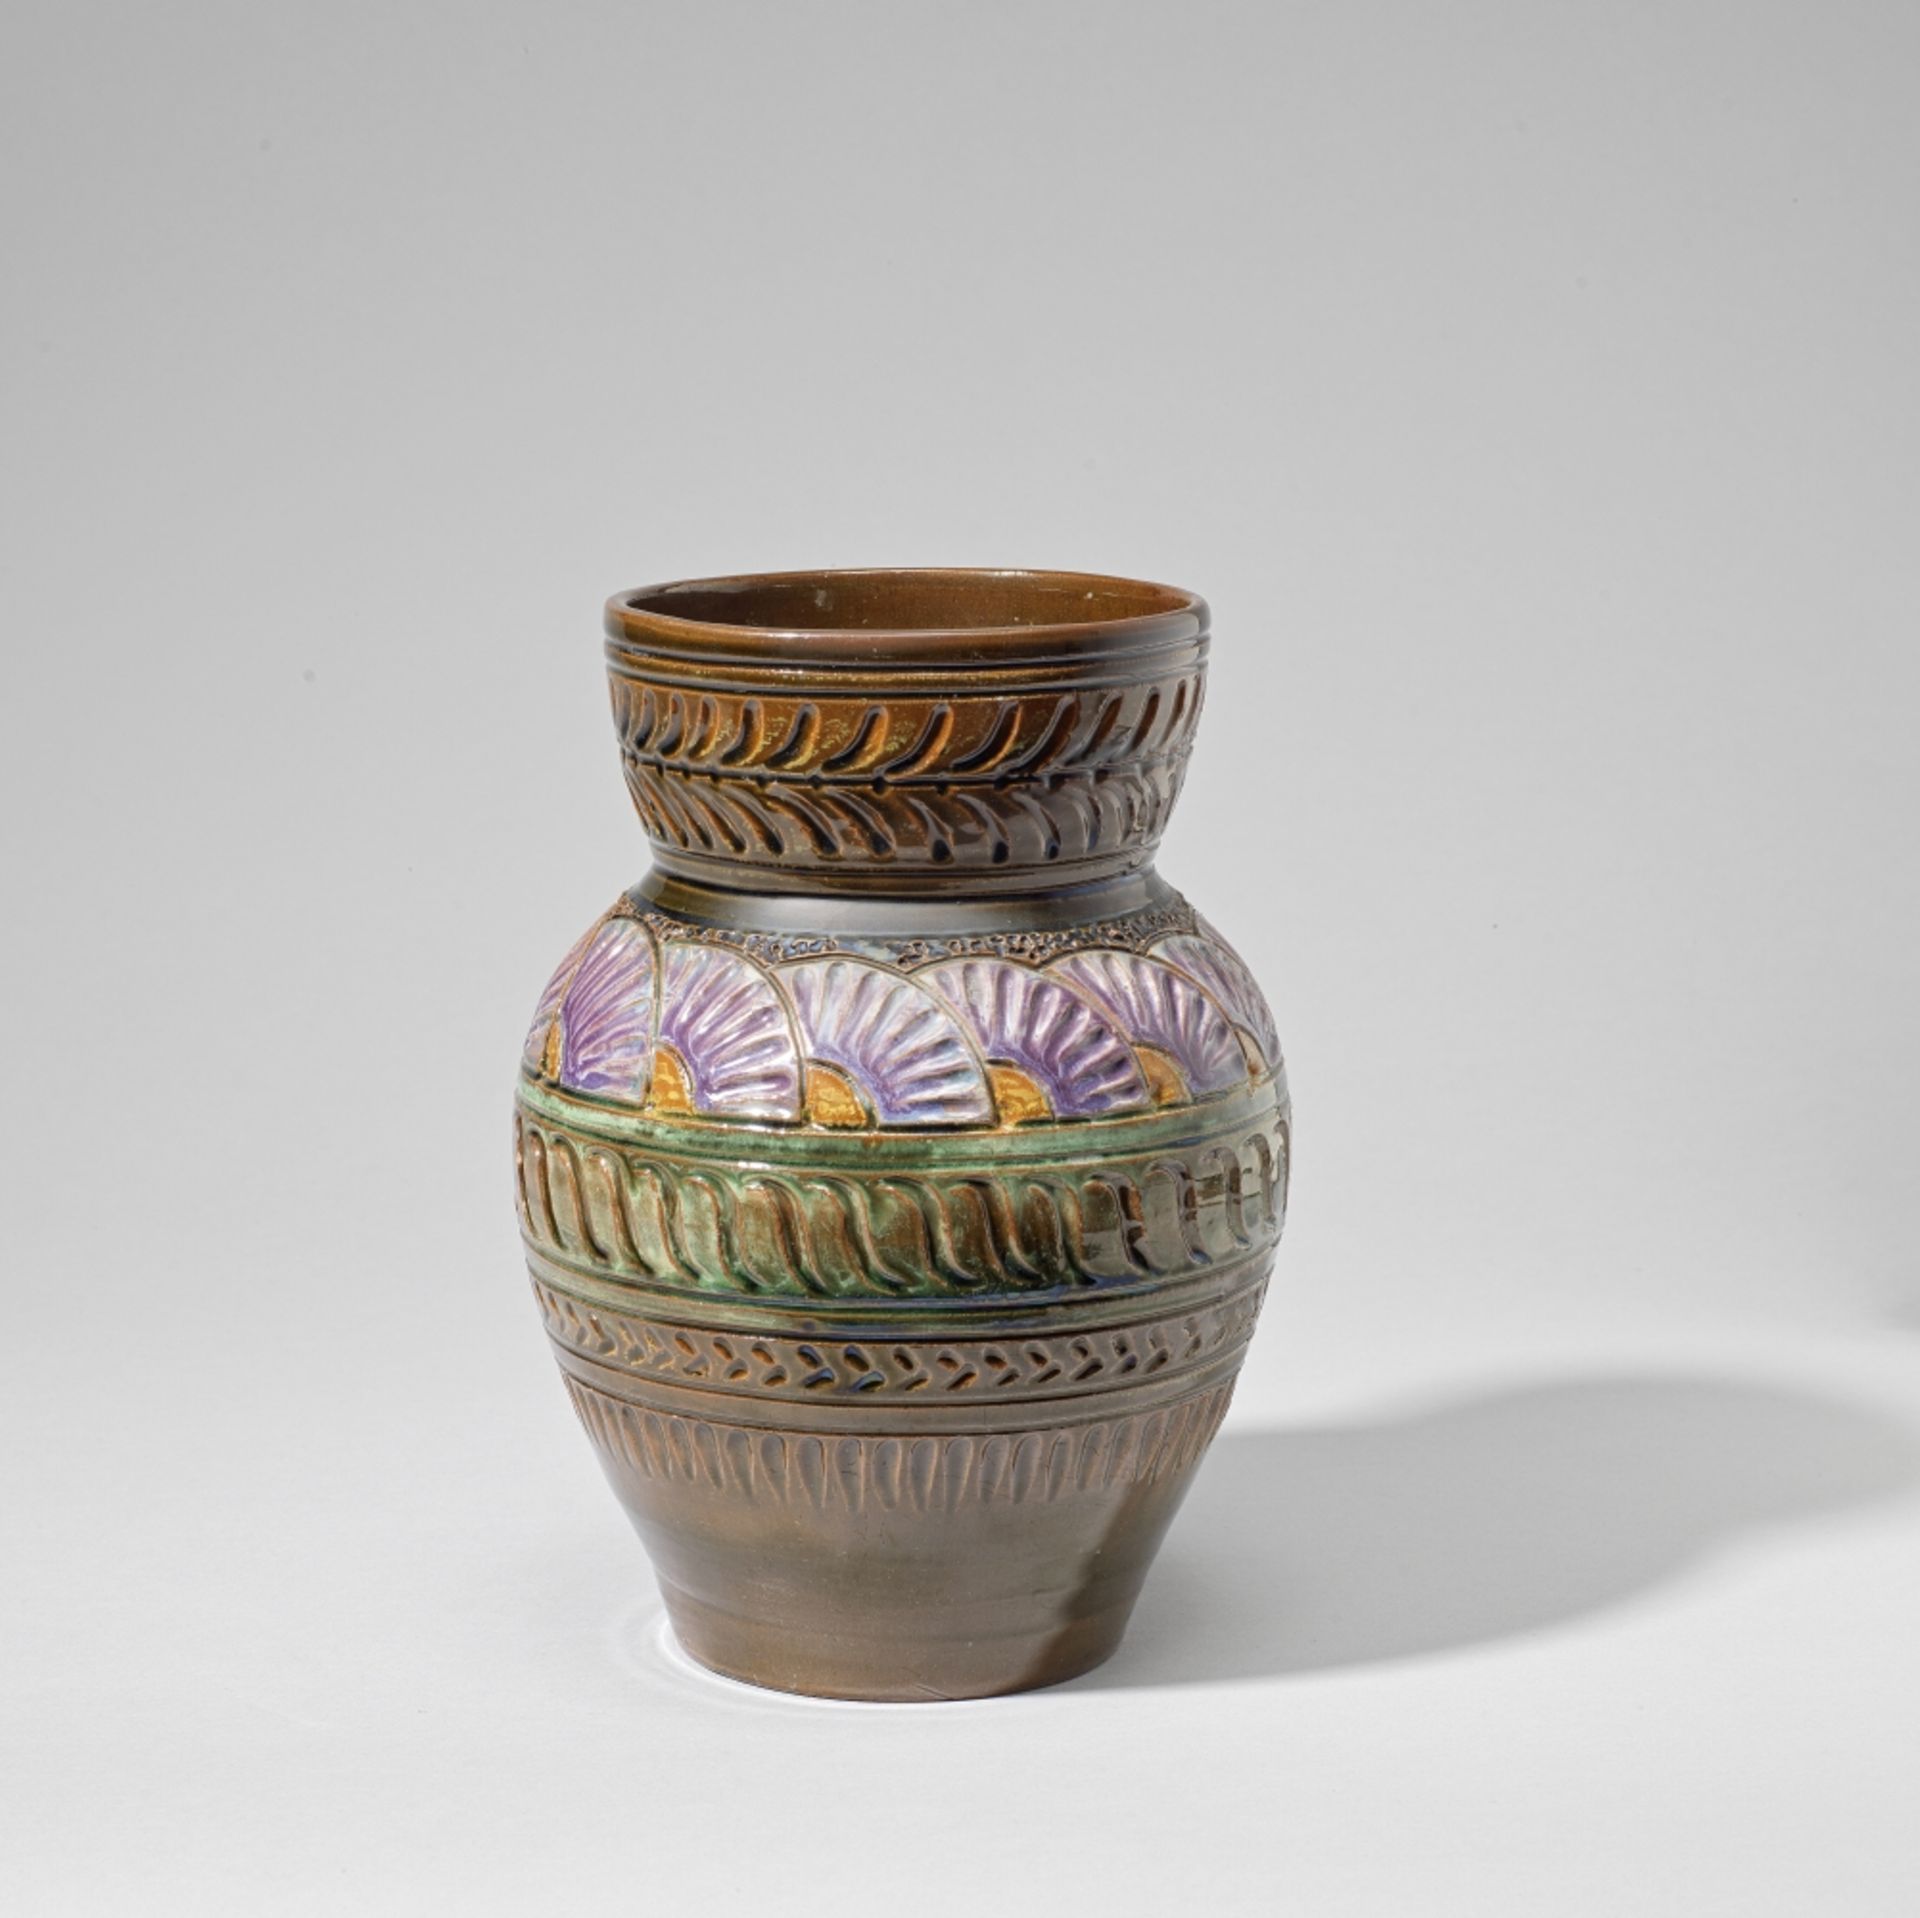 Dr Christopher Dresser: Made by Linthorpe Pottery Vase, circa 1880